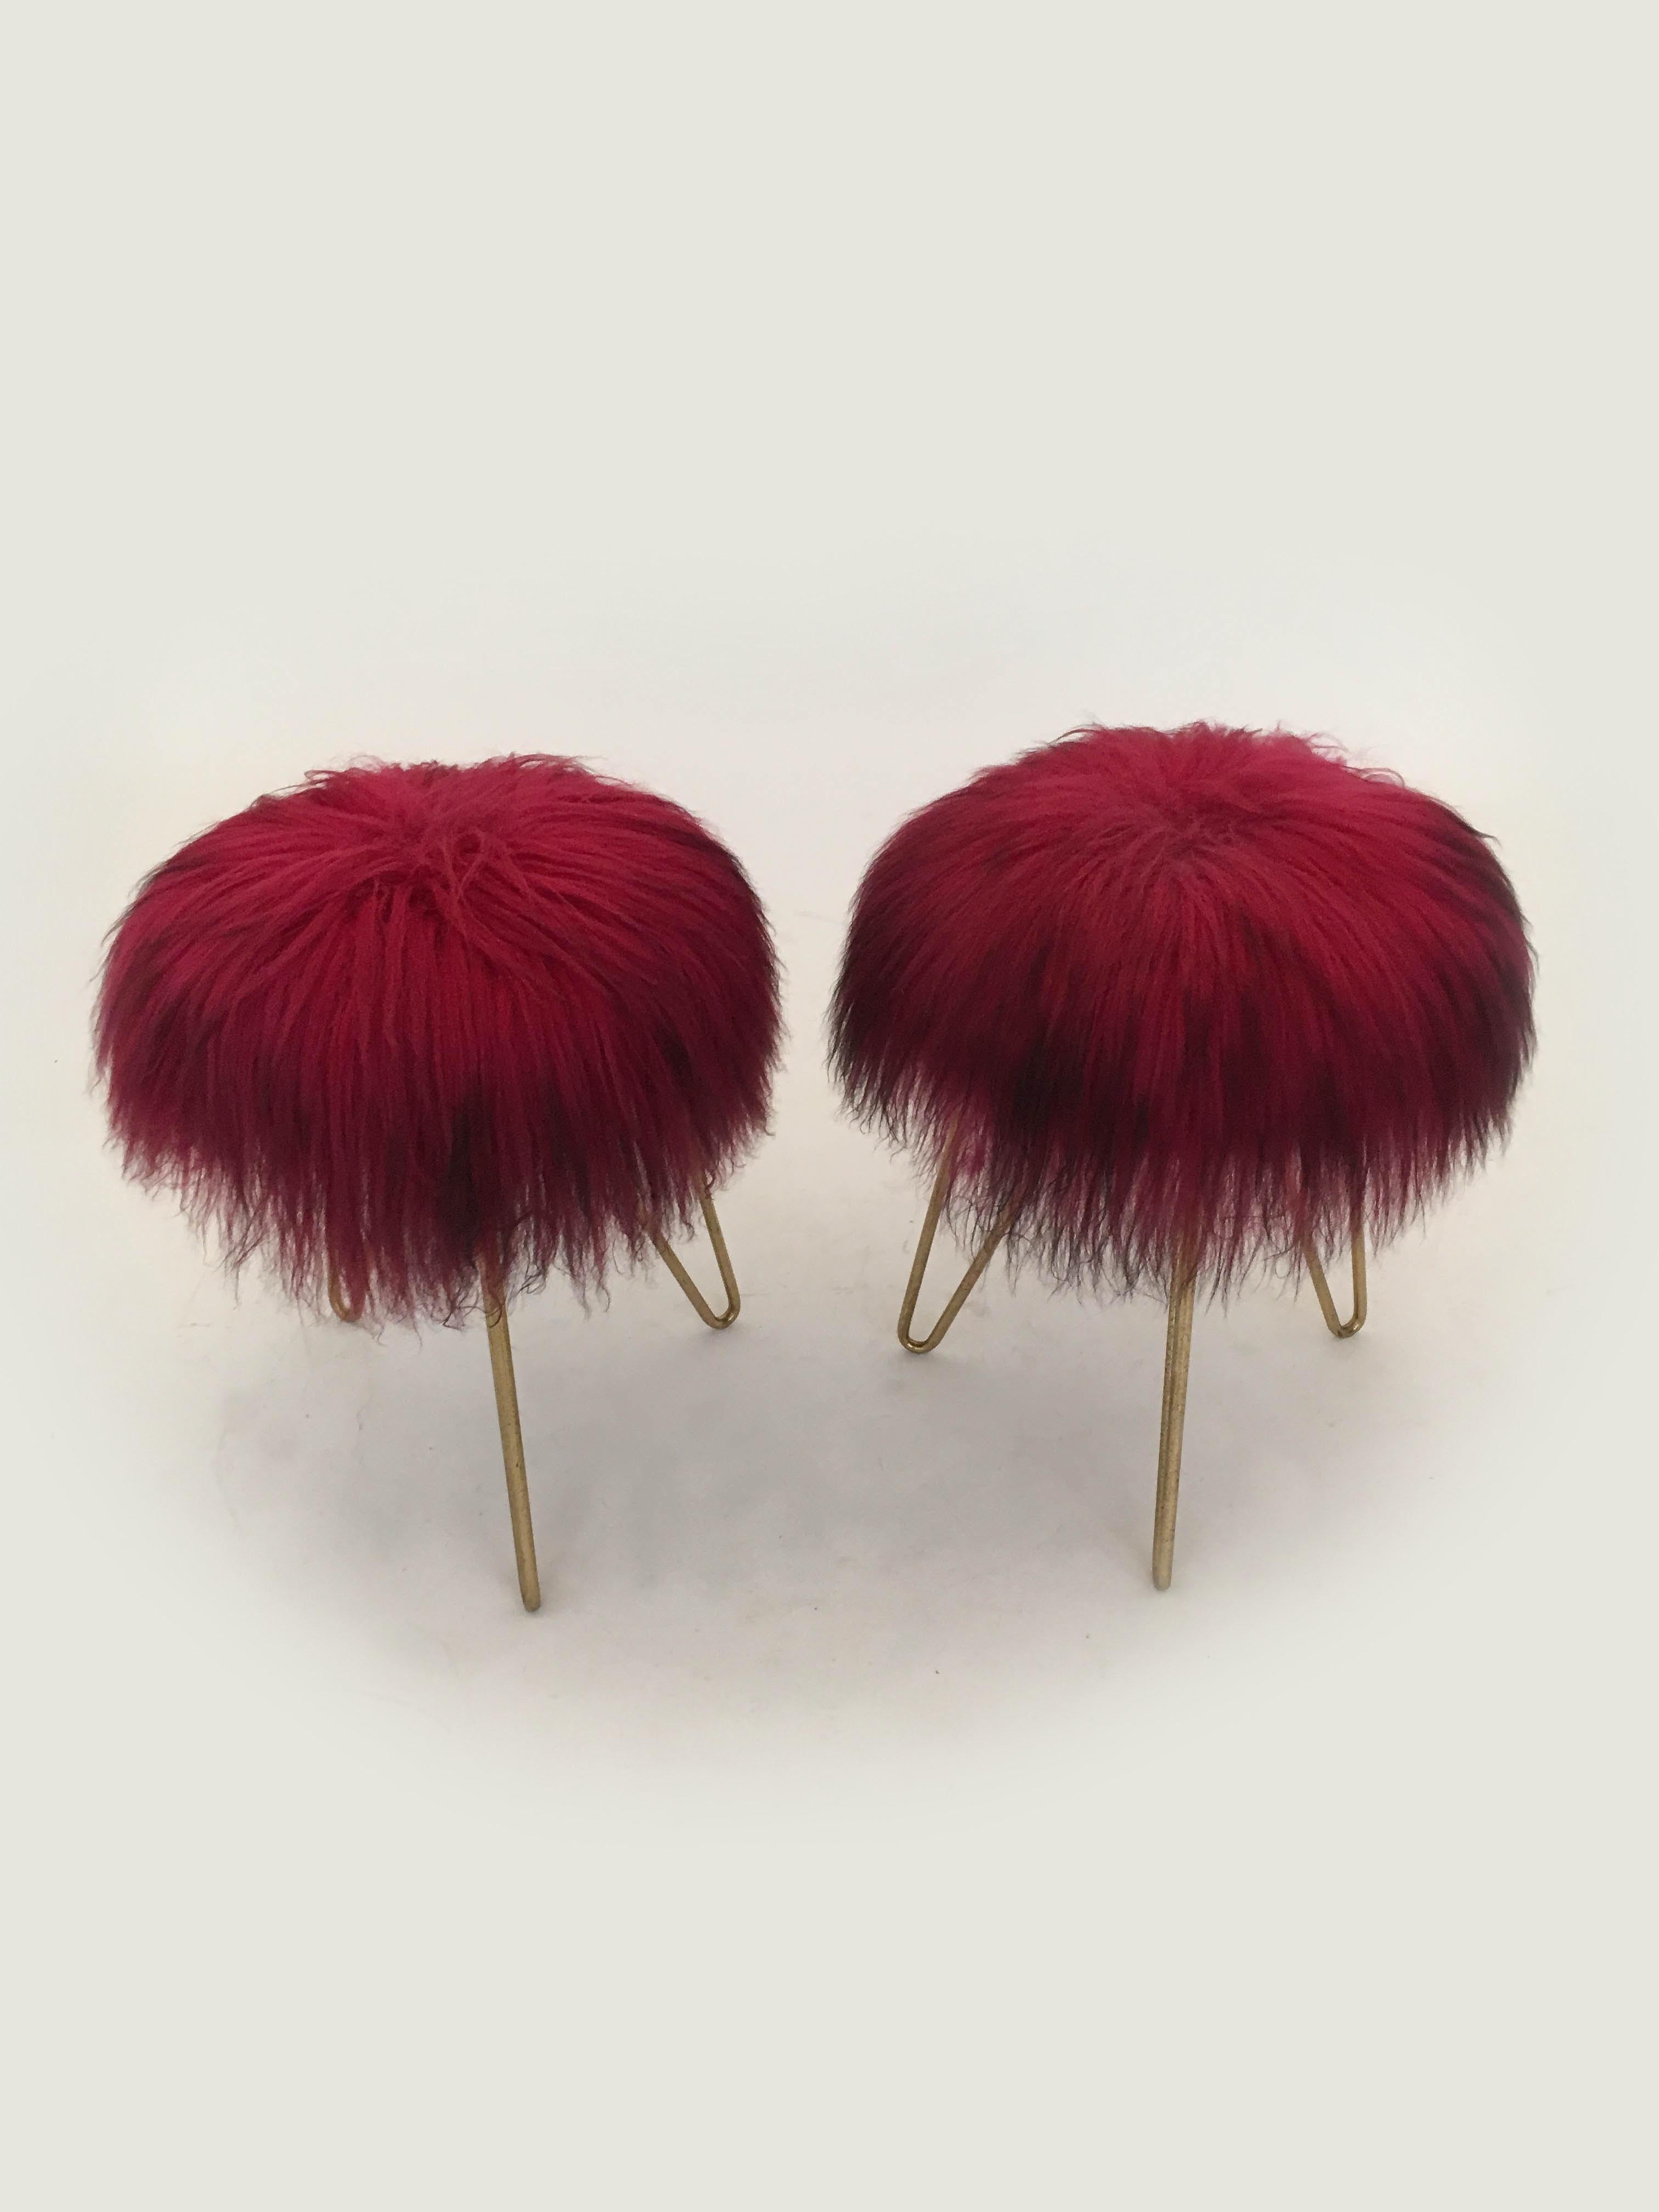 Brass Sheep Fur Stools, France, 1950s For Sale